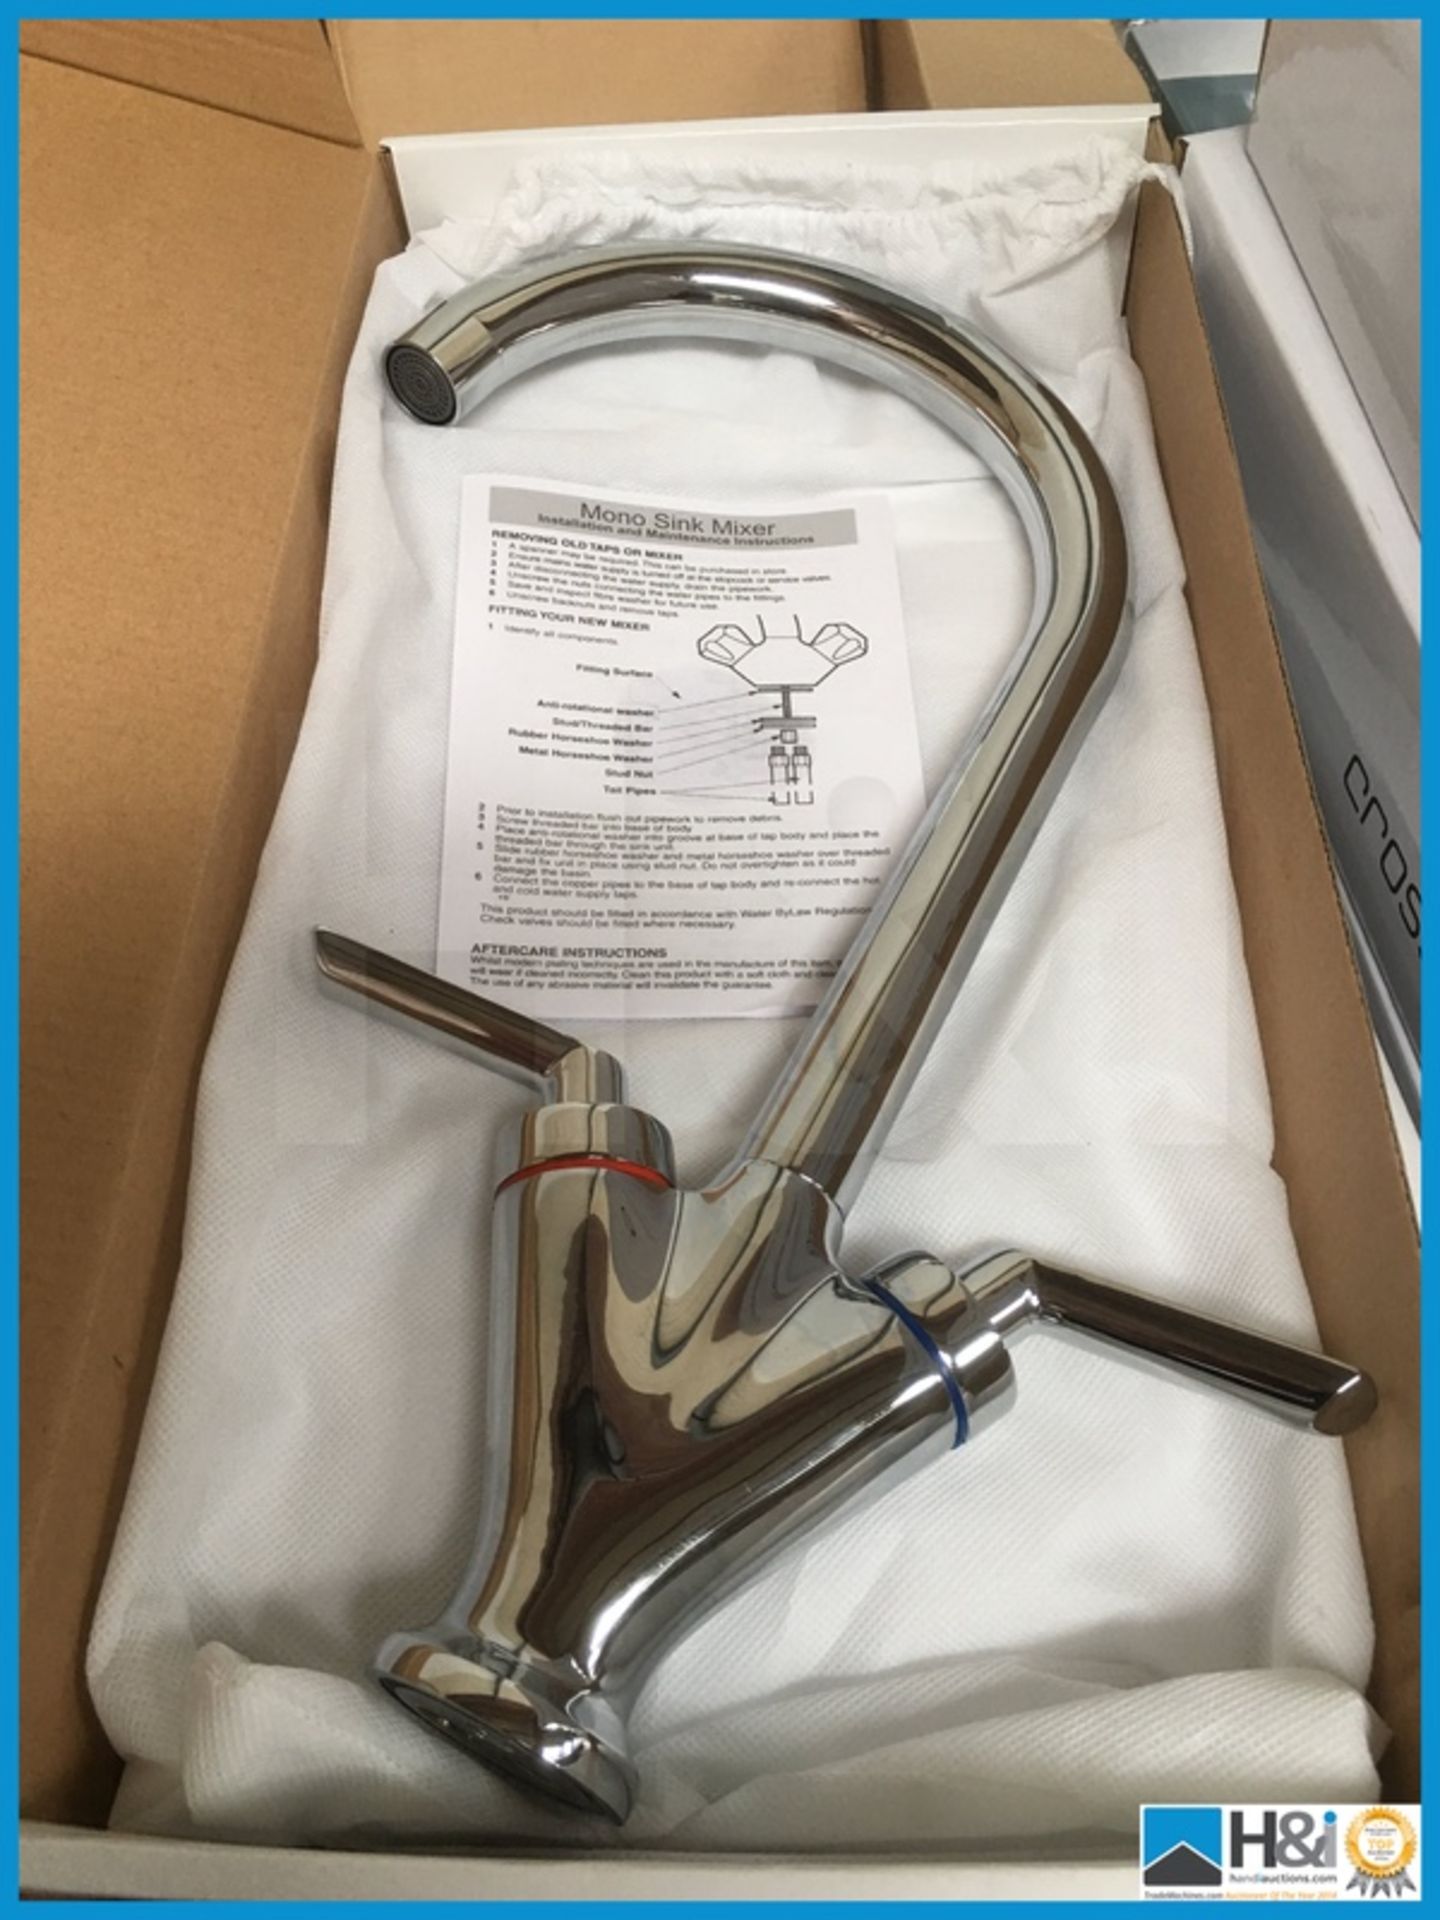 Beautiful TS77 designer polished chrome kitchen mono mixer. New and boxed. Suggested manufacturers